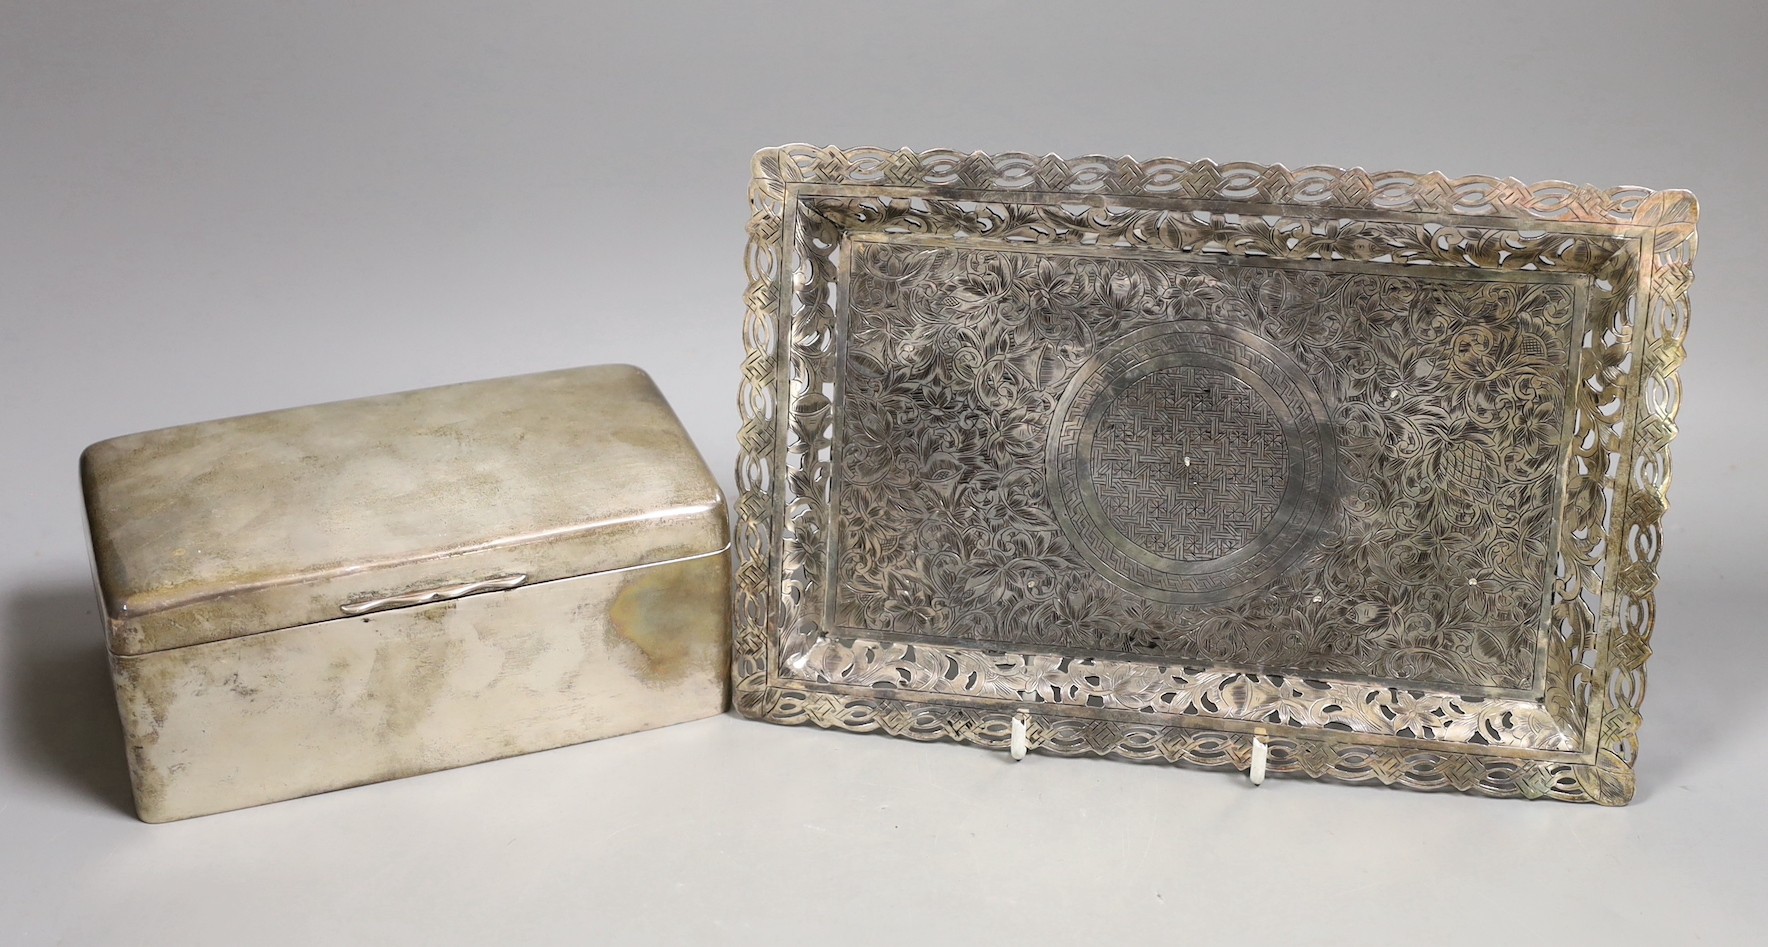 A George V silver mounted rectangular cigarette box, Birmingham, 1911, 17.2cm and an engraved white metal small tray.